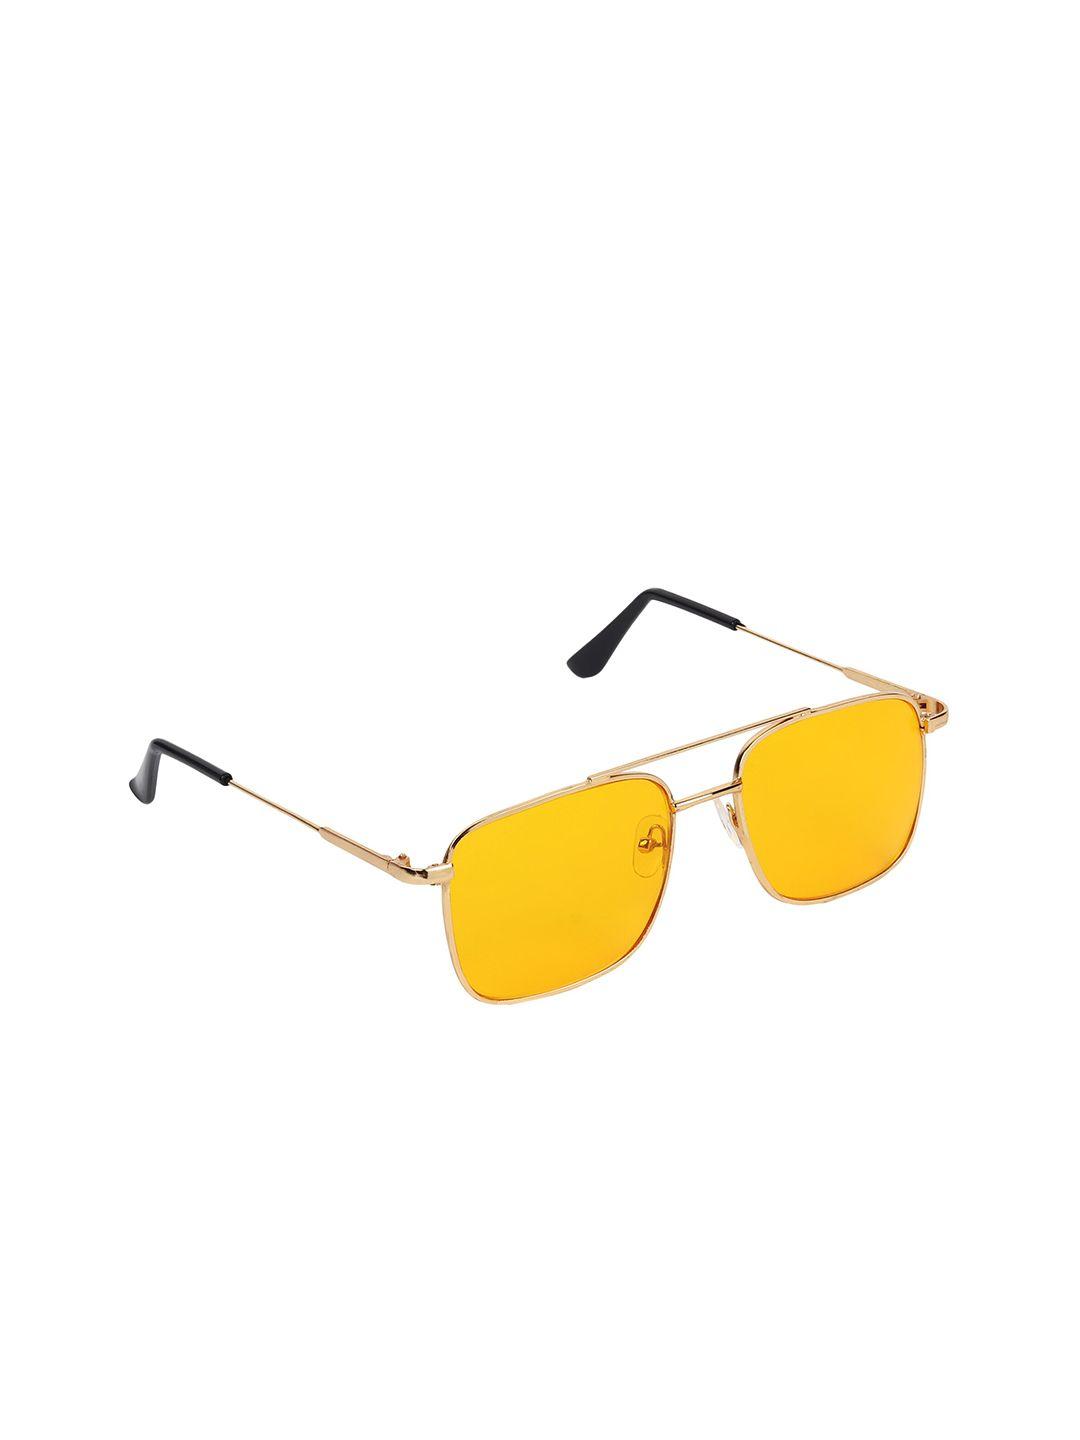 garth unisex yellow lens & gold-toned square sunglasses with uv protected lens